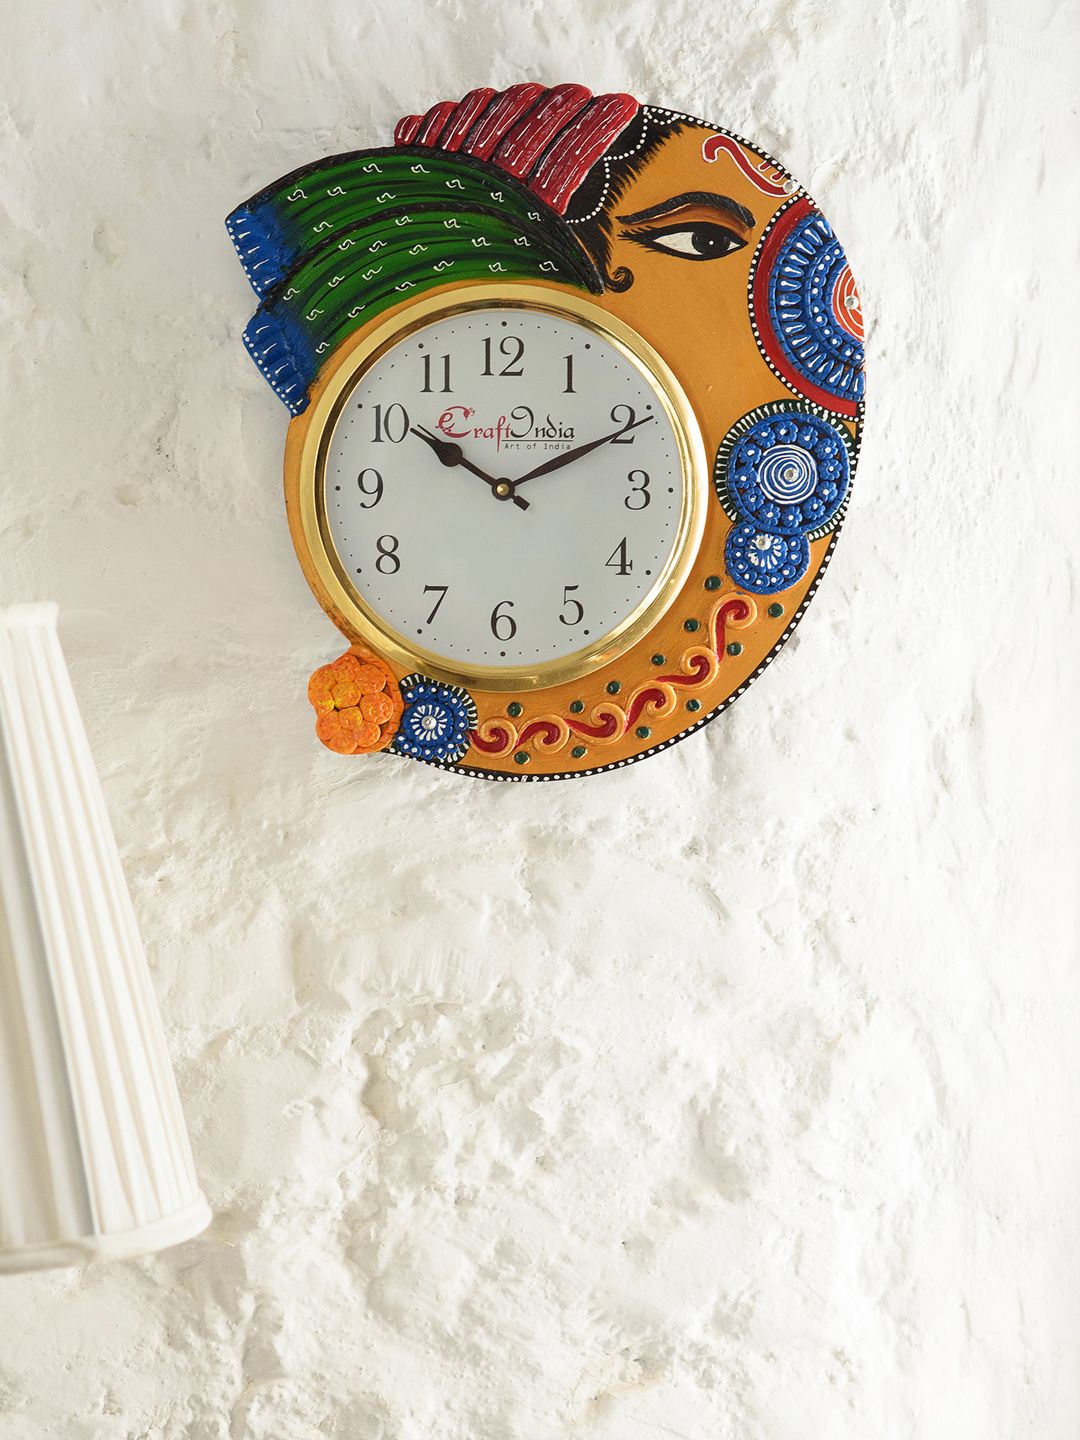 eCraftIndia White & Blue Handcrafted Quirky Embellished Analogue Wall Clock Price in India